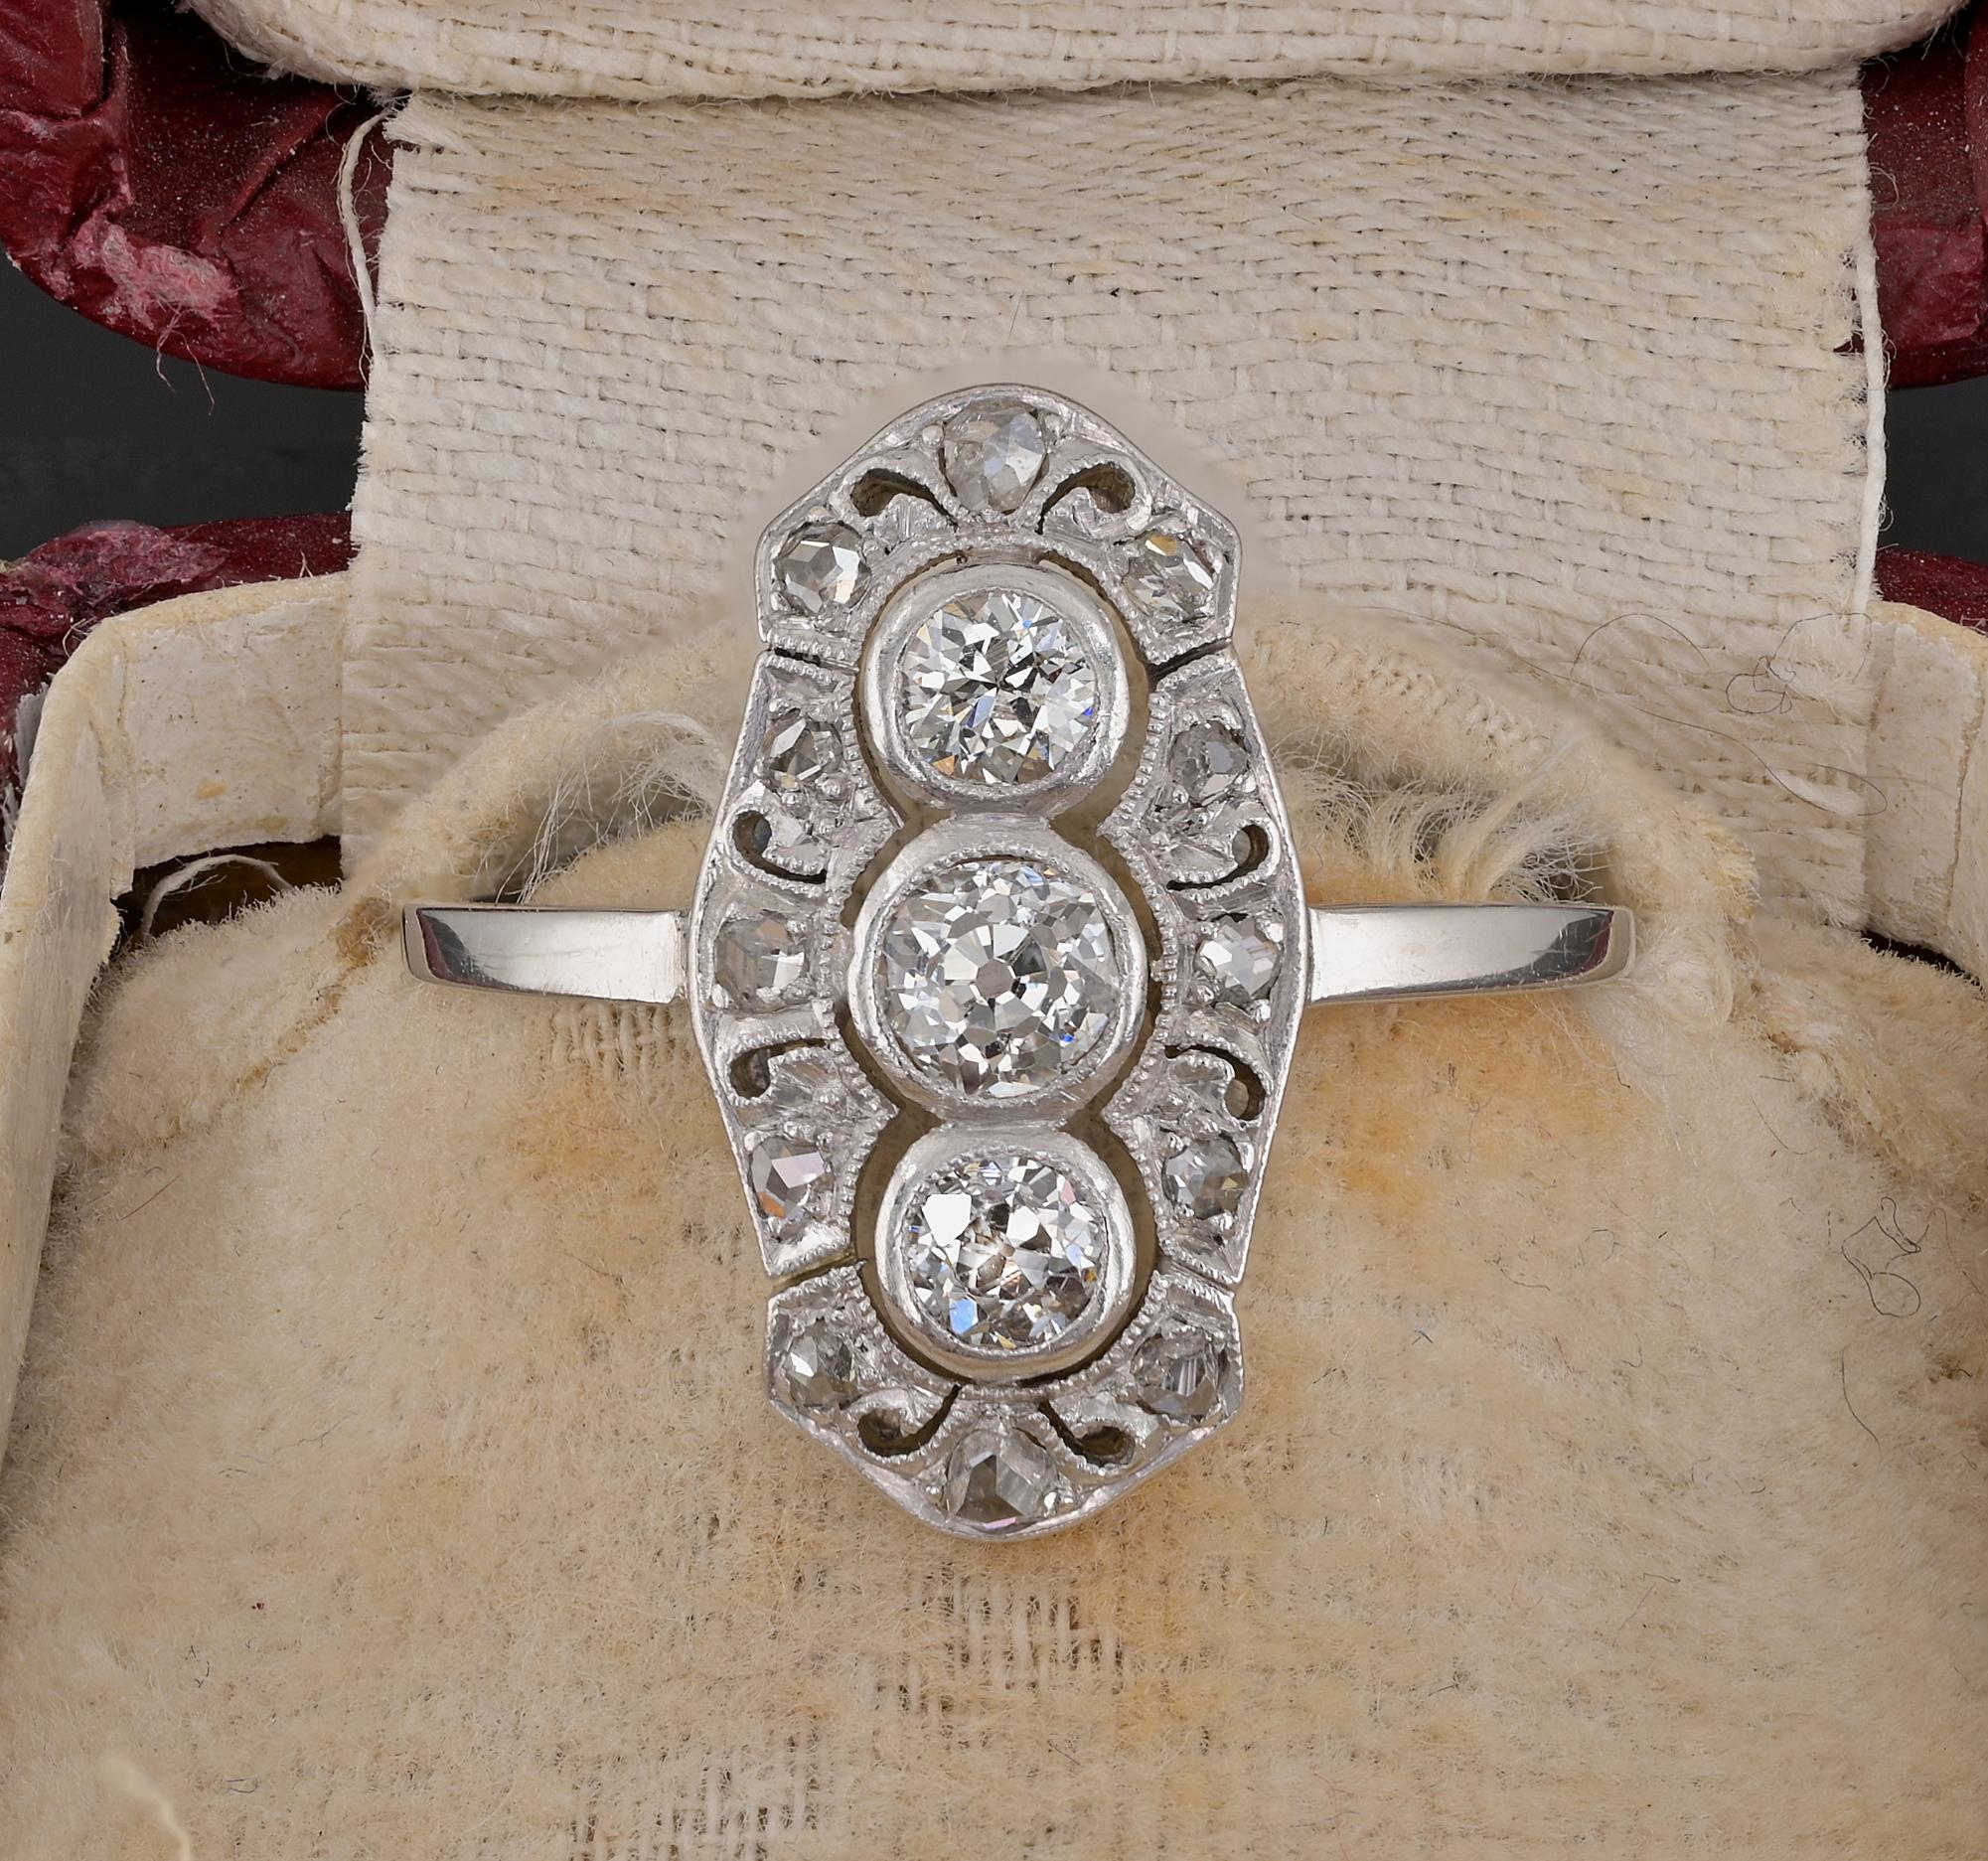 Edwardian Sensual and sinuous ballerina design ring, Platinum hand crafted as unique, 1900 ca
Fine openwork with a timeless Edwardian design, set with vertical trio of Diamonds encircled in a target and bordered with major sparkle of rose cut